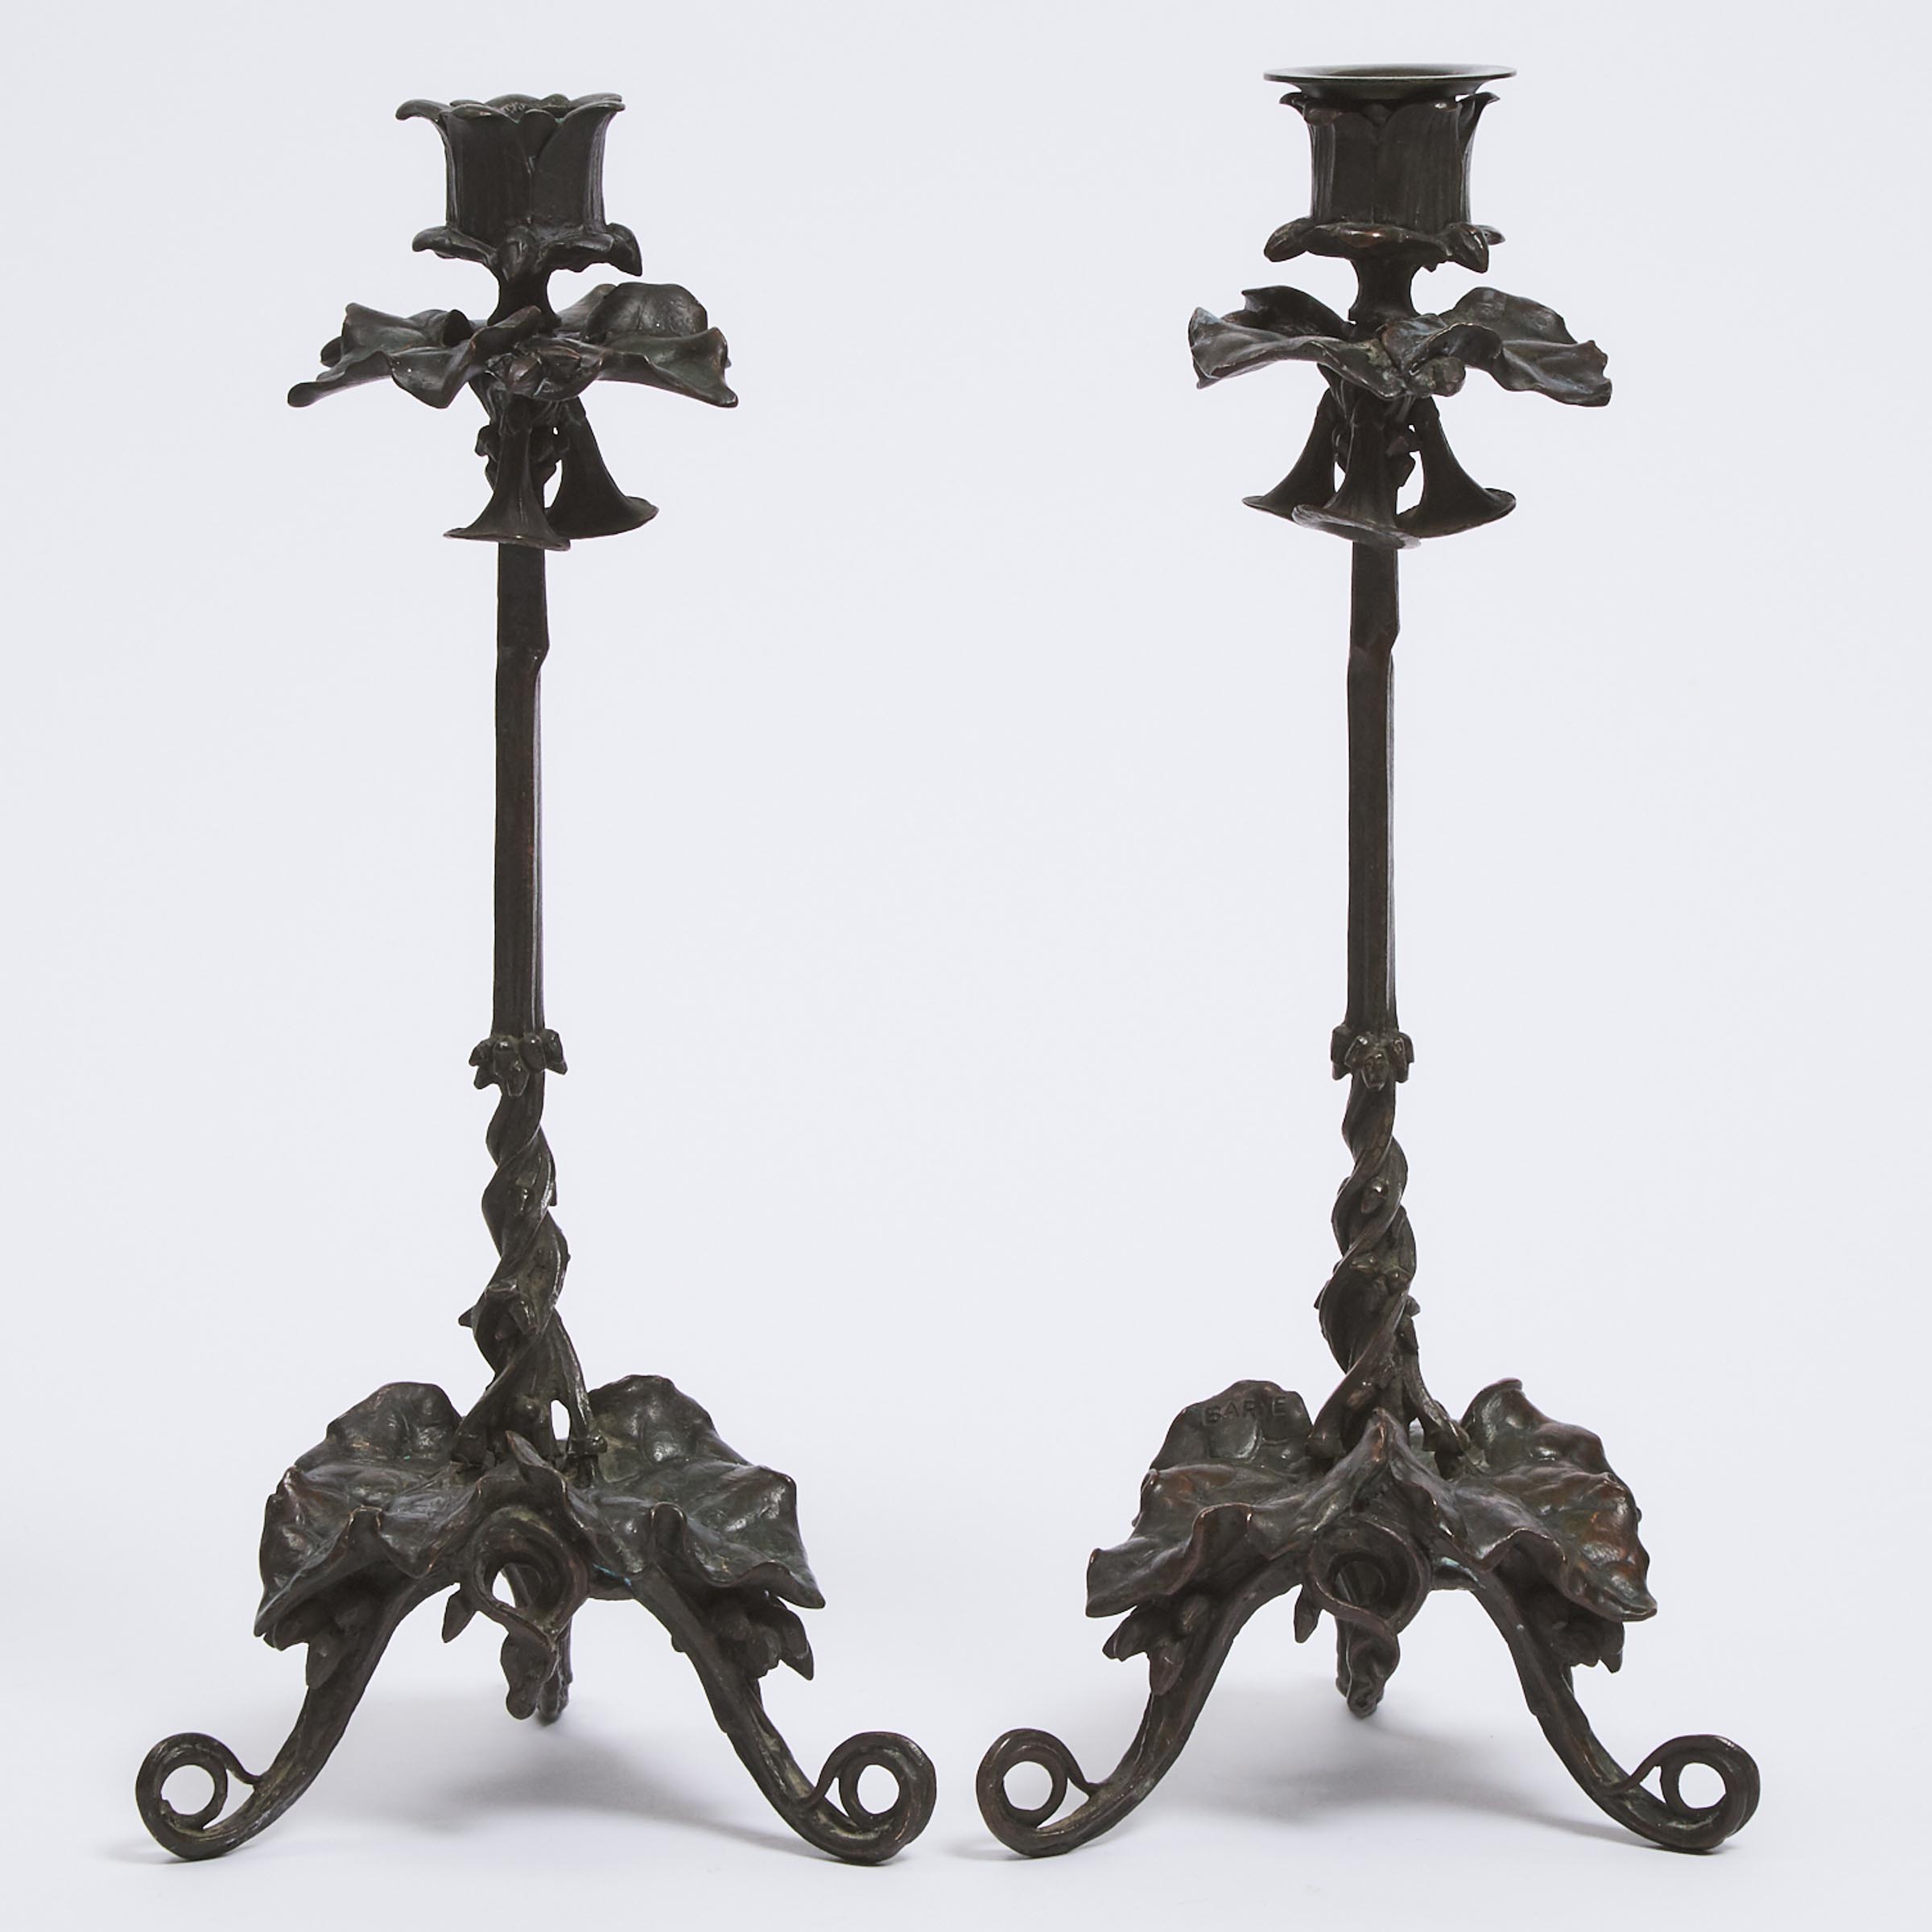 Pair of Naturalistic Movement Patinated Bronze Candlesticks, After Antoine-Louis Barye (French 1796-1875)